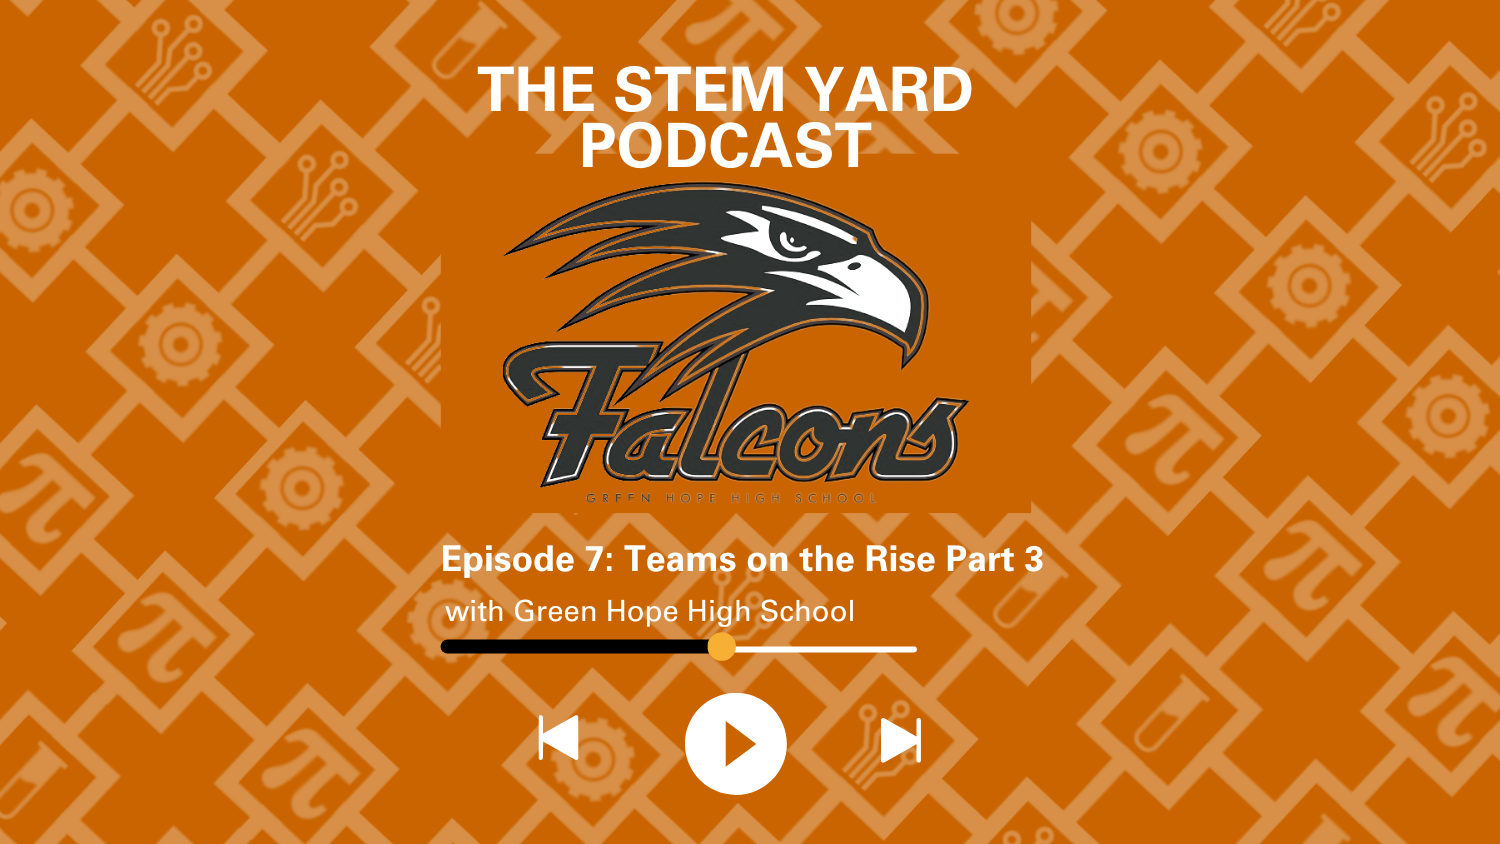 The STEM Yard Episode 7: Teams on the Rise Part 2 with Green Hope High School